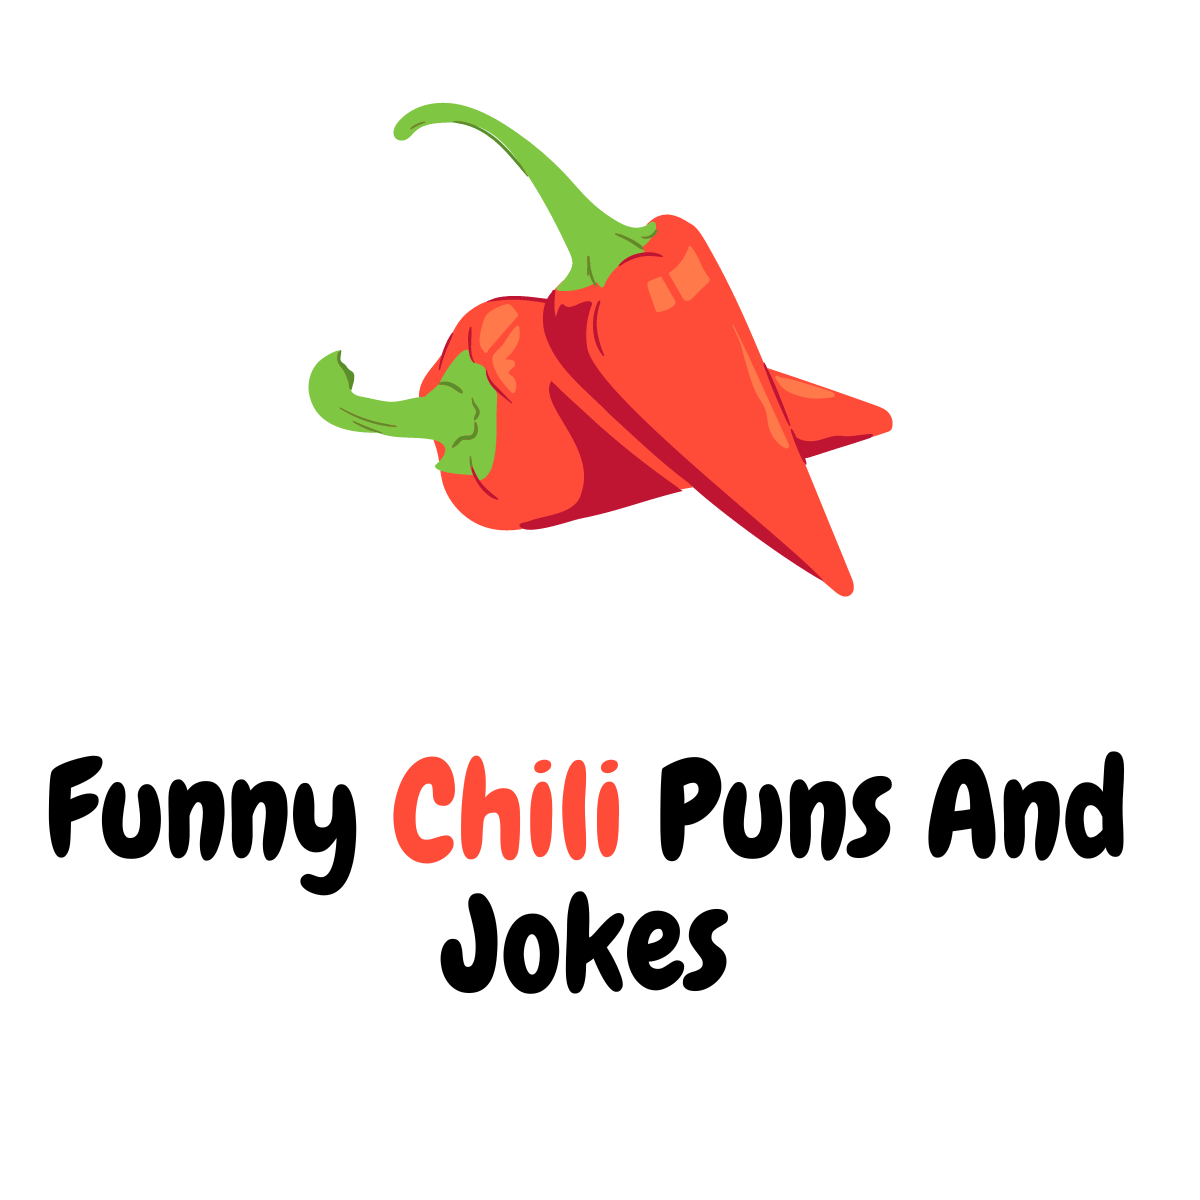 120+ Funny Chili Puns And Jokes: Hot and Hilarious